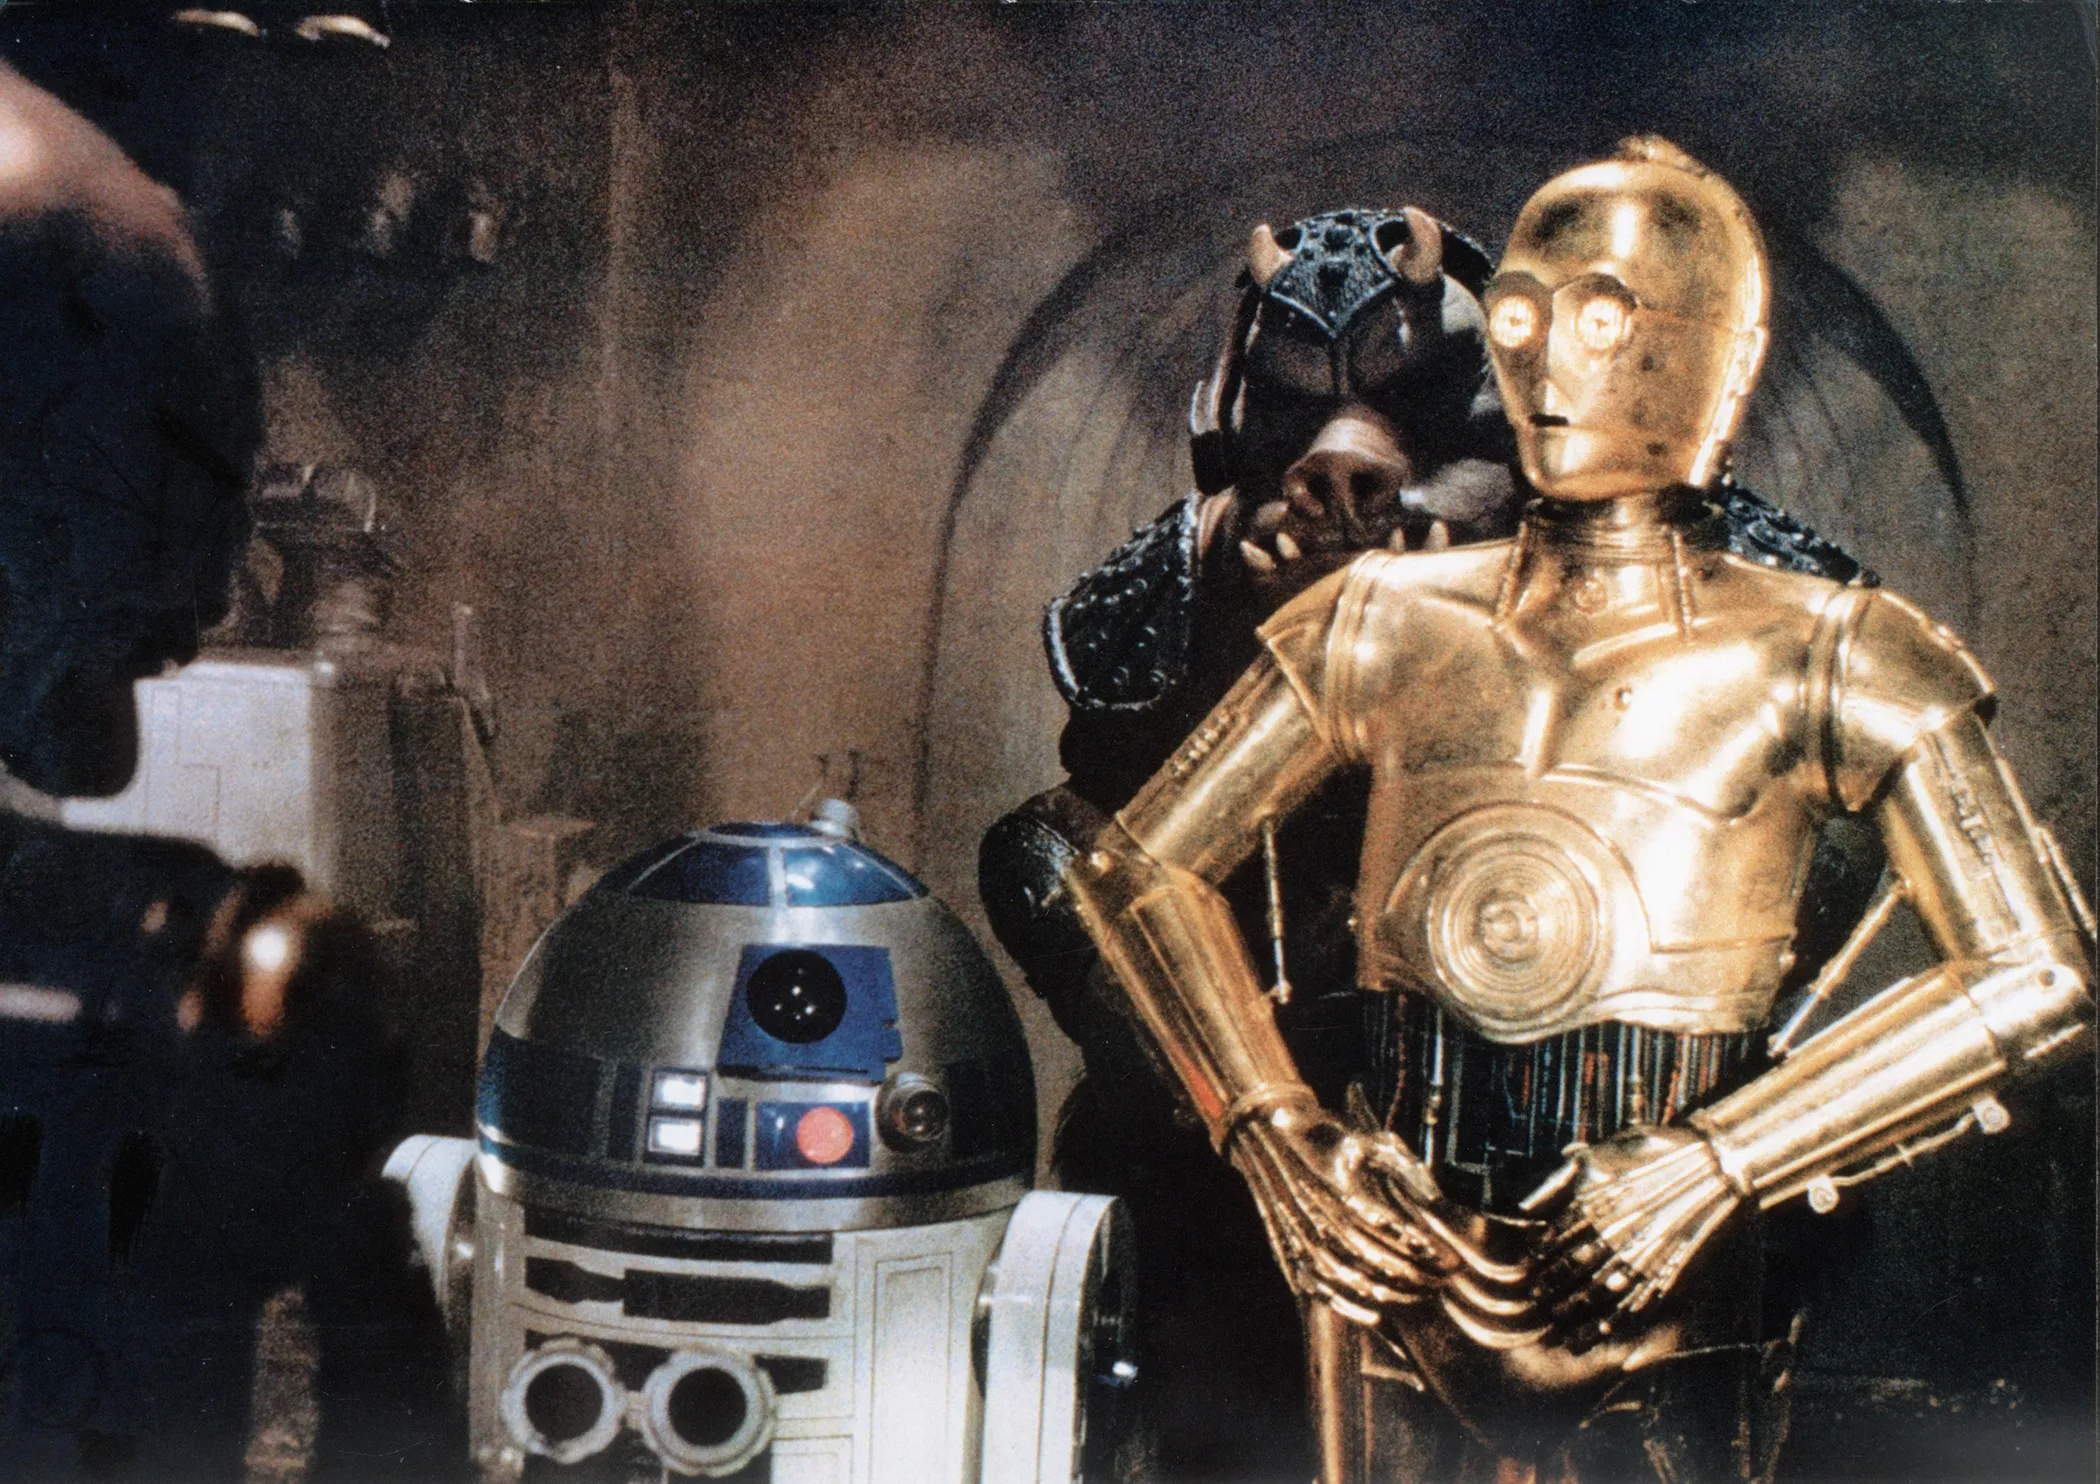 How to Watch All the Star Wars Movies Before 'The Force Awakens' Premieres